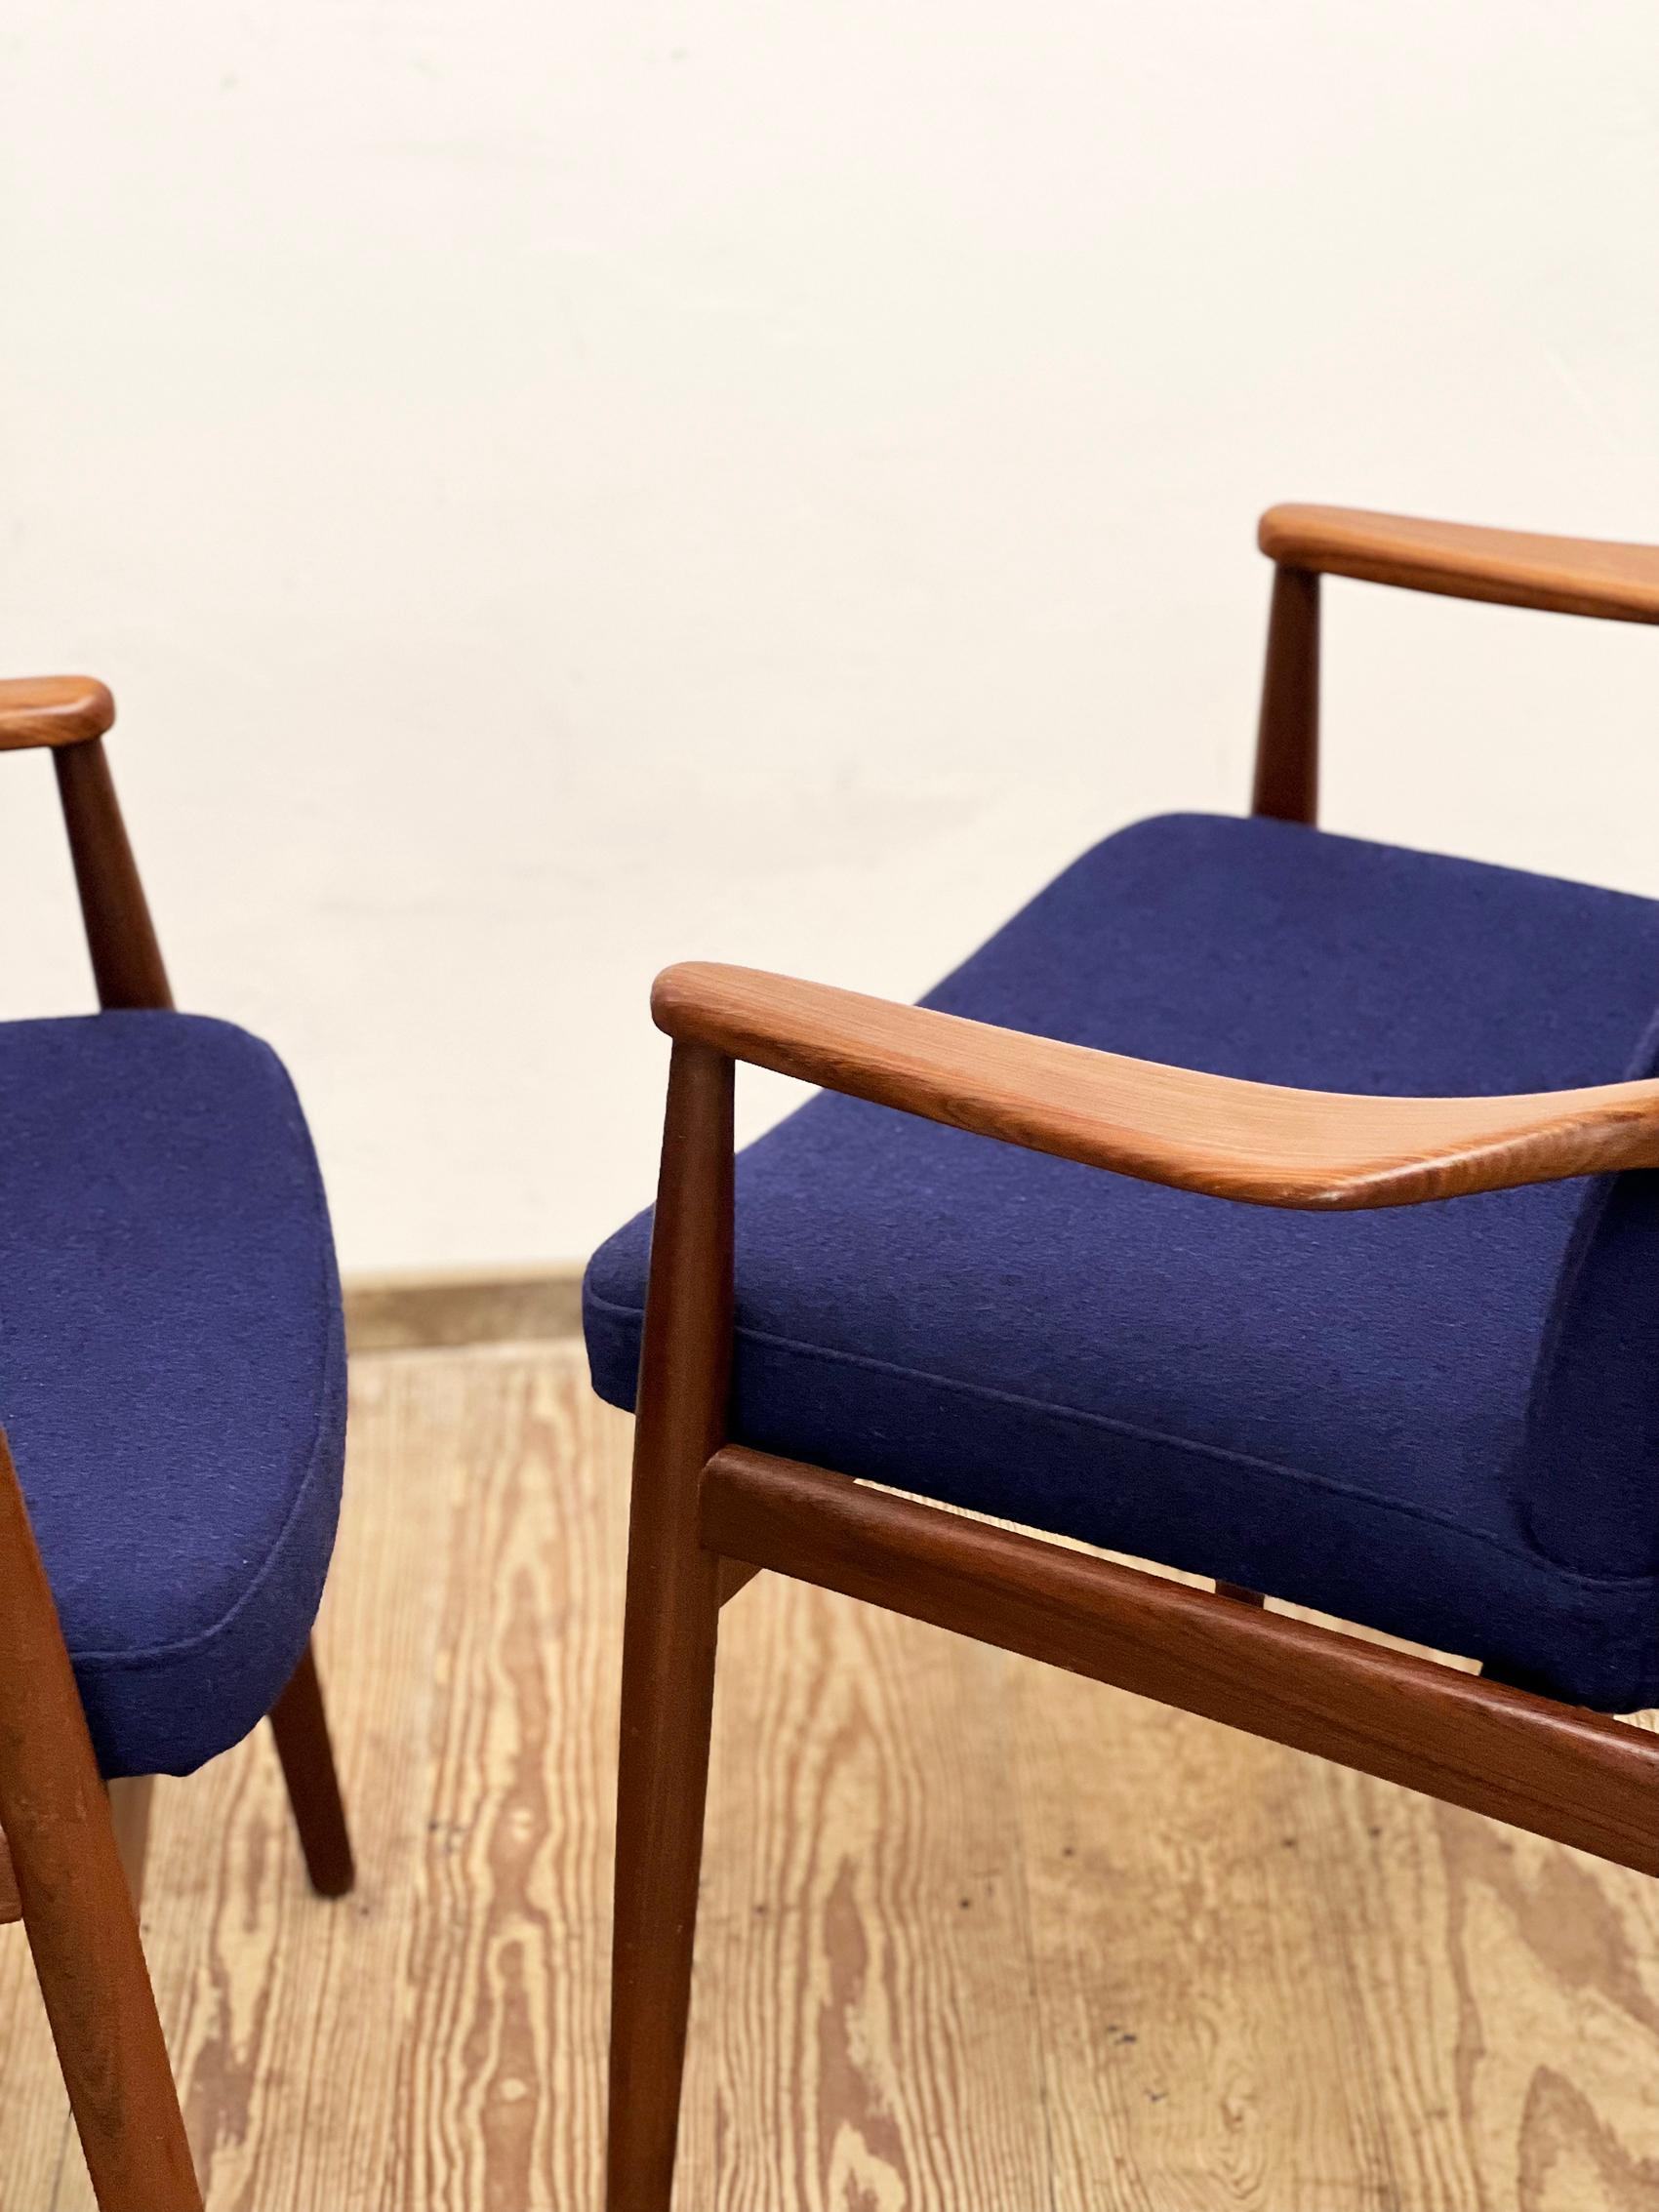 Two Mid-Century Modern Teak Armchairs by Hartmut Lohmeyer for Wilkhahn, 1950s For Sale 12